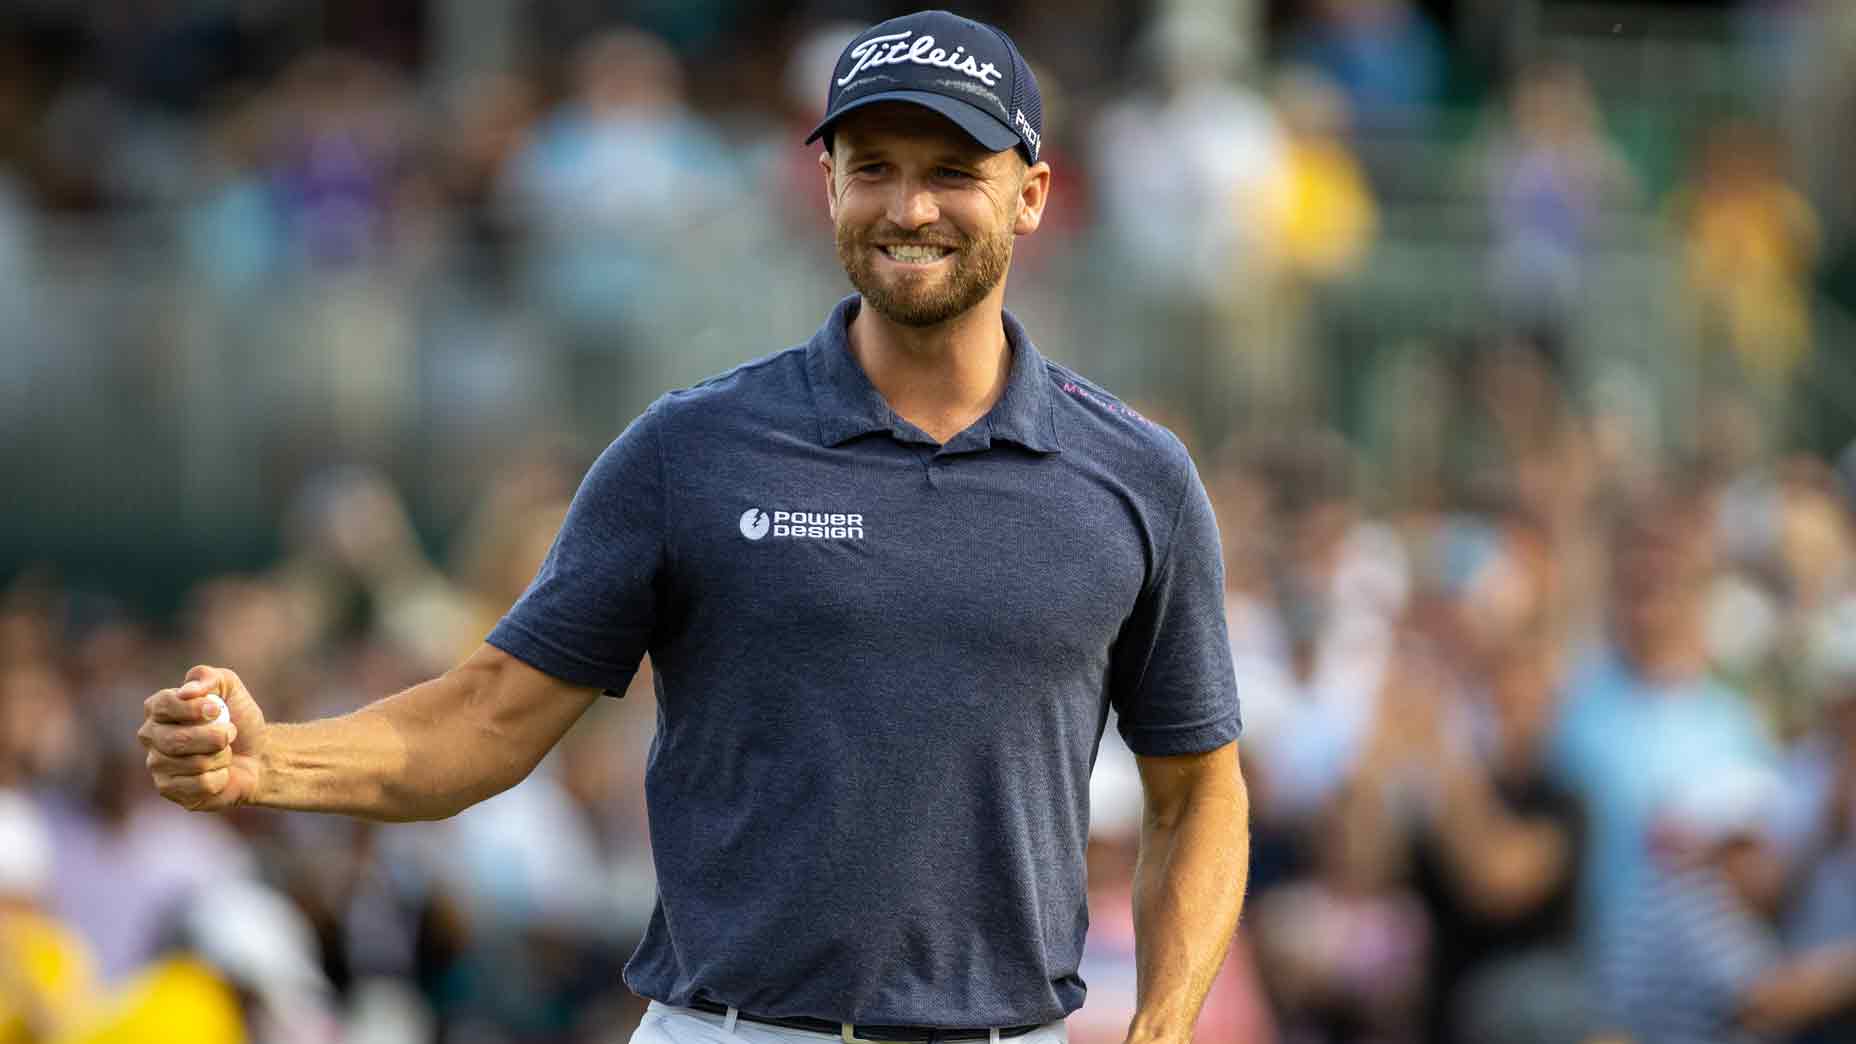 Pro recalls moment he remembered awesome perk for PGA Tour winners